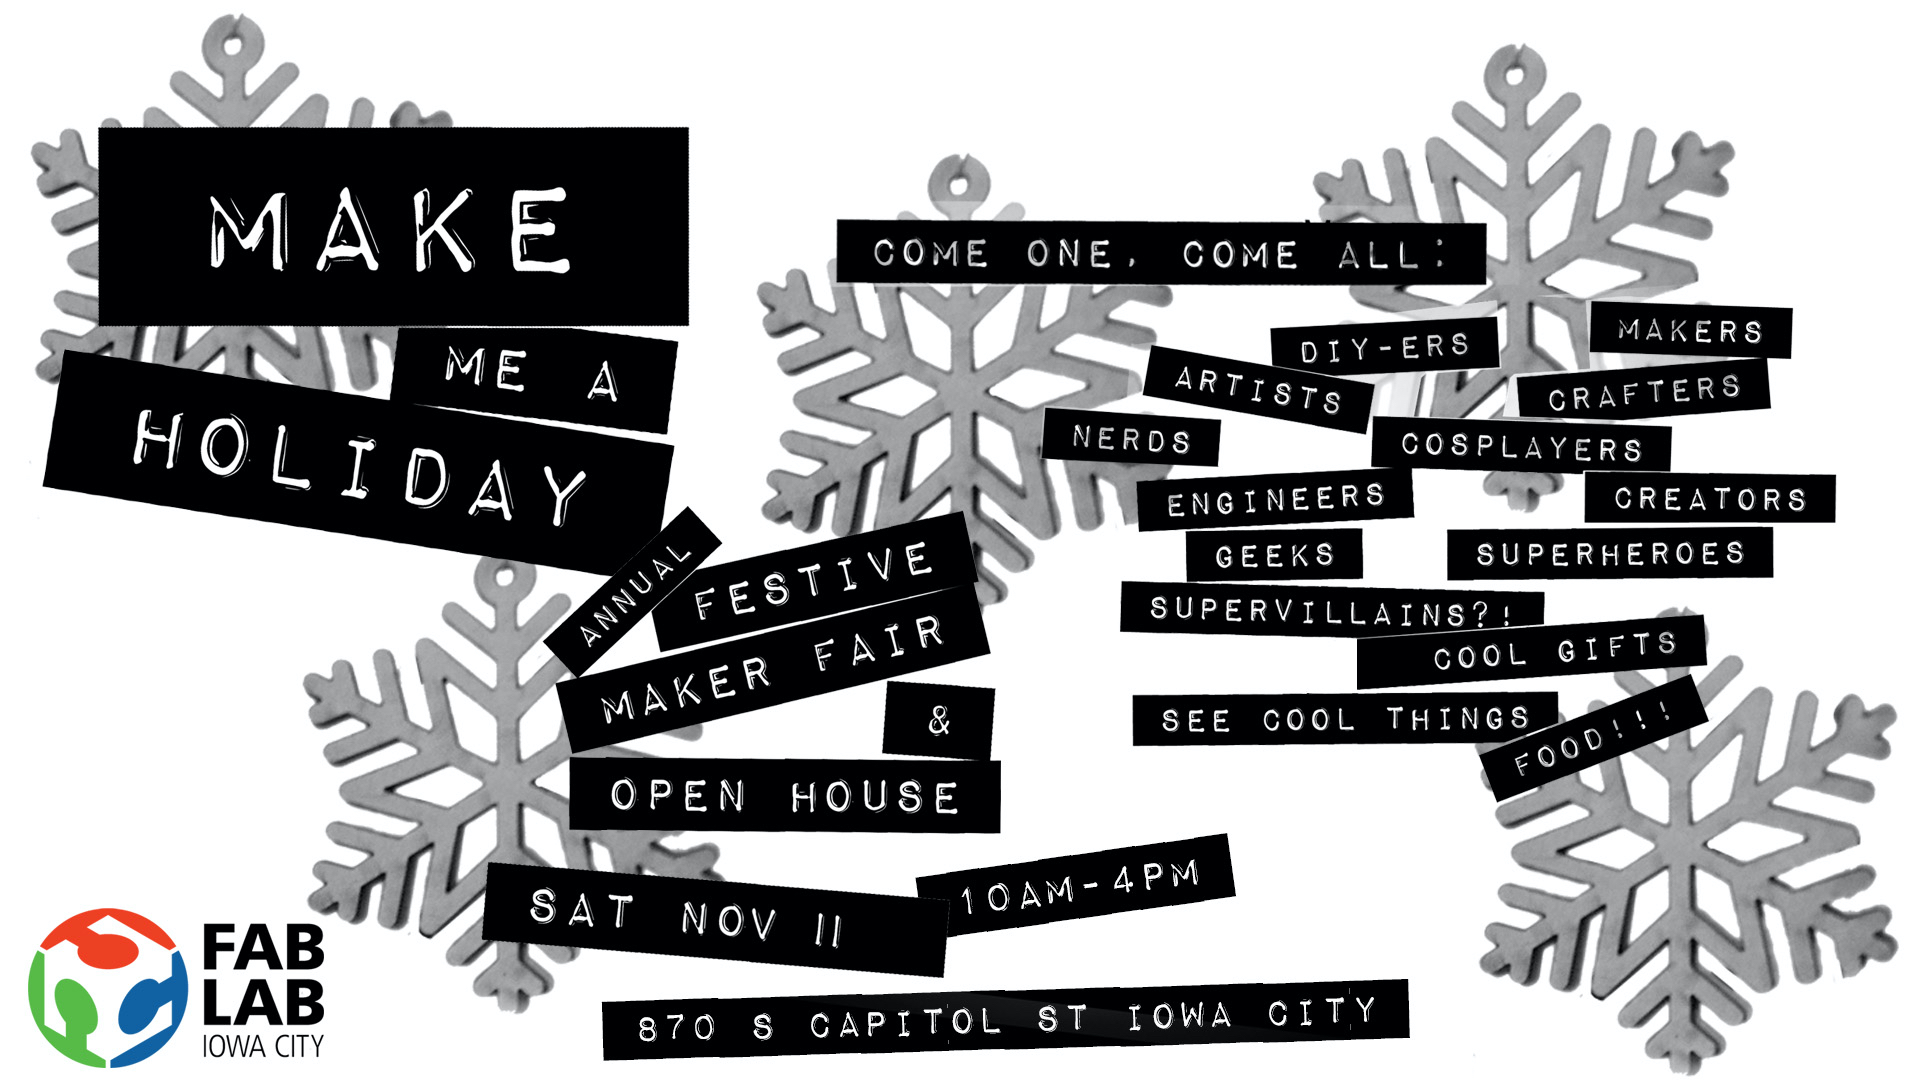 "Make Me a Holiday," on November 11. There will be food, demonstrations, and family activities. The event is free and open to the public. ❄️ Check out creative kits for kids and adults to make or take, as well as local vendors selling their own creations ❄️ Watch demonstrations on laser cutting, wood turning, yarn spinning, and more ❄️ Indulge in a warm beverage, a tasty treat, and support your local artists and makers. Schedule Sat Nov 11 2023 at 10:00 am to 4:00 pm. Location Iowa City Fab Lab | Iowa City, IA https://icfablab.org/